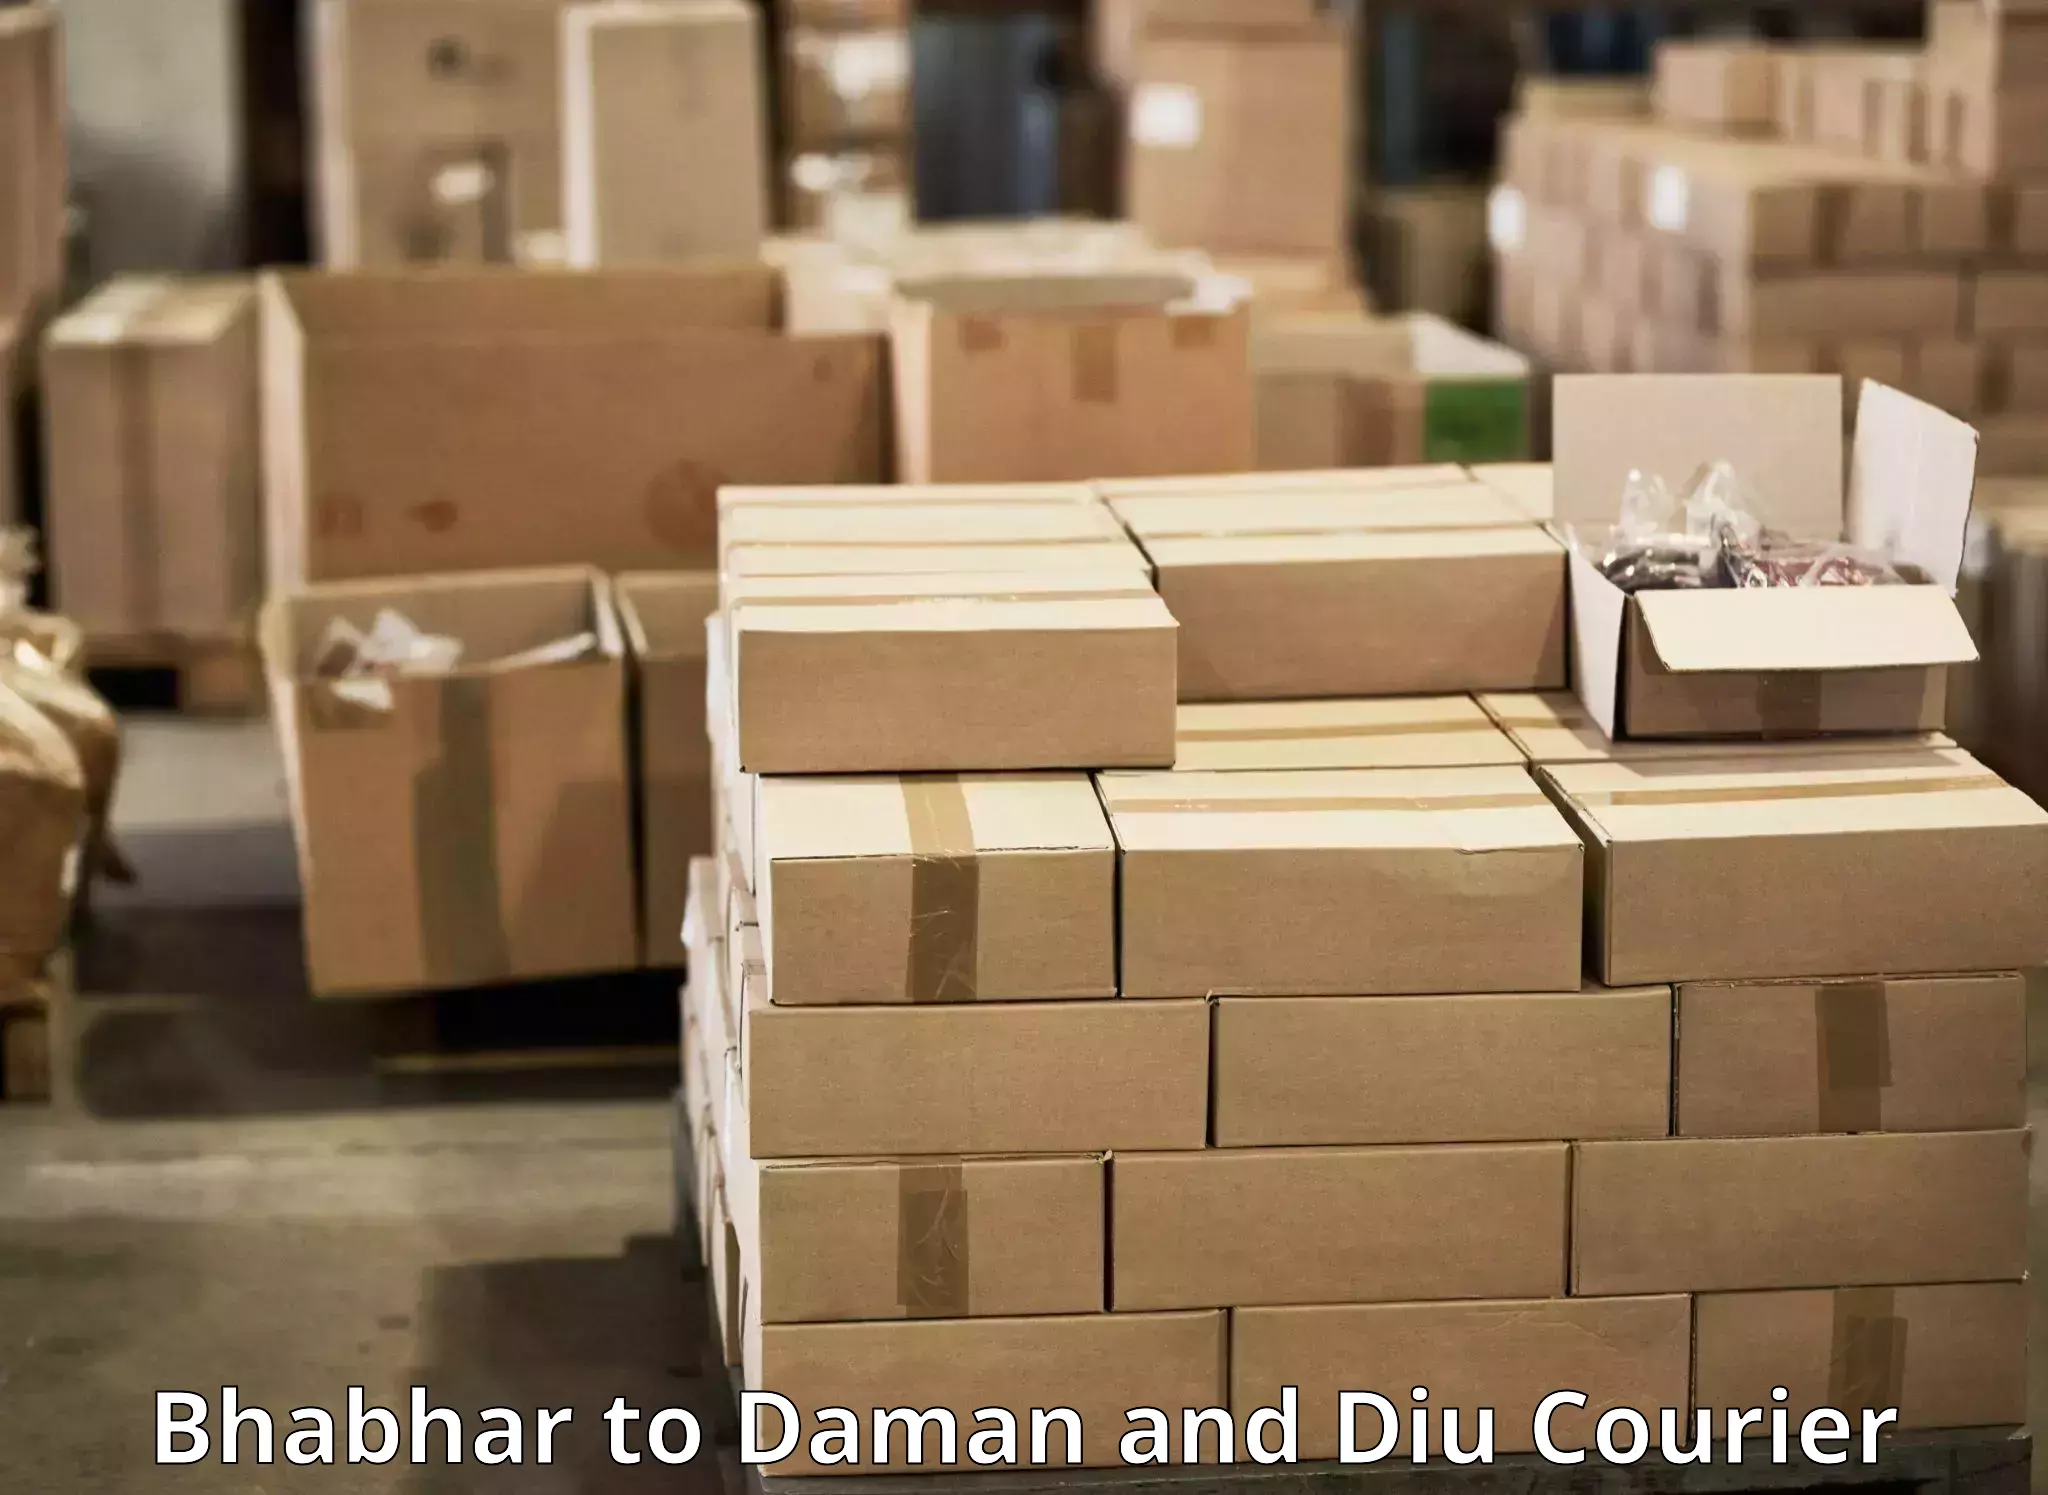 Round-the-clock parcel delivery Bhabhar to Diu